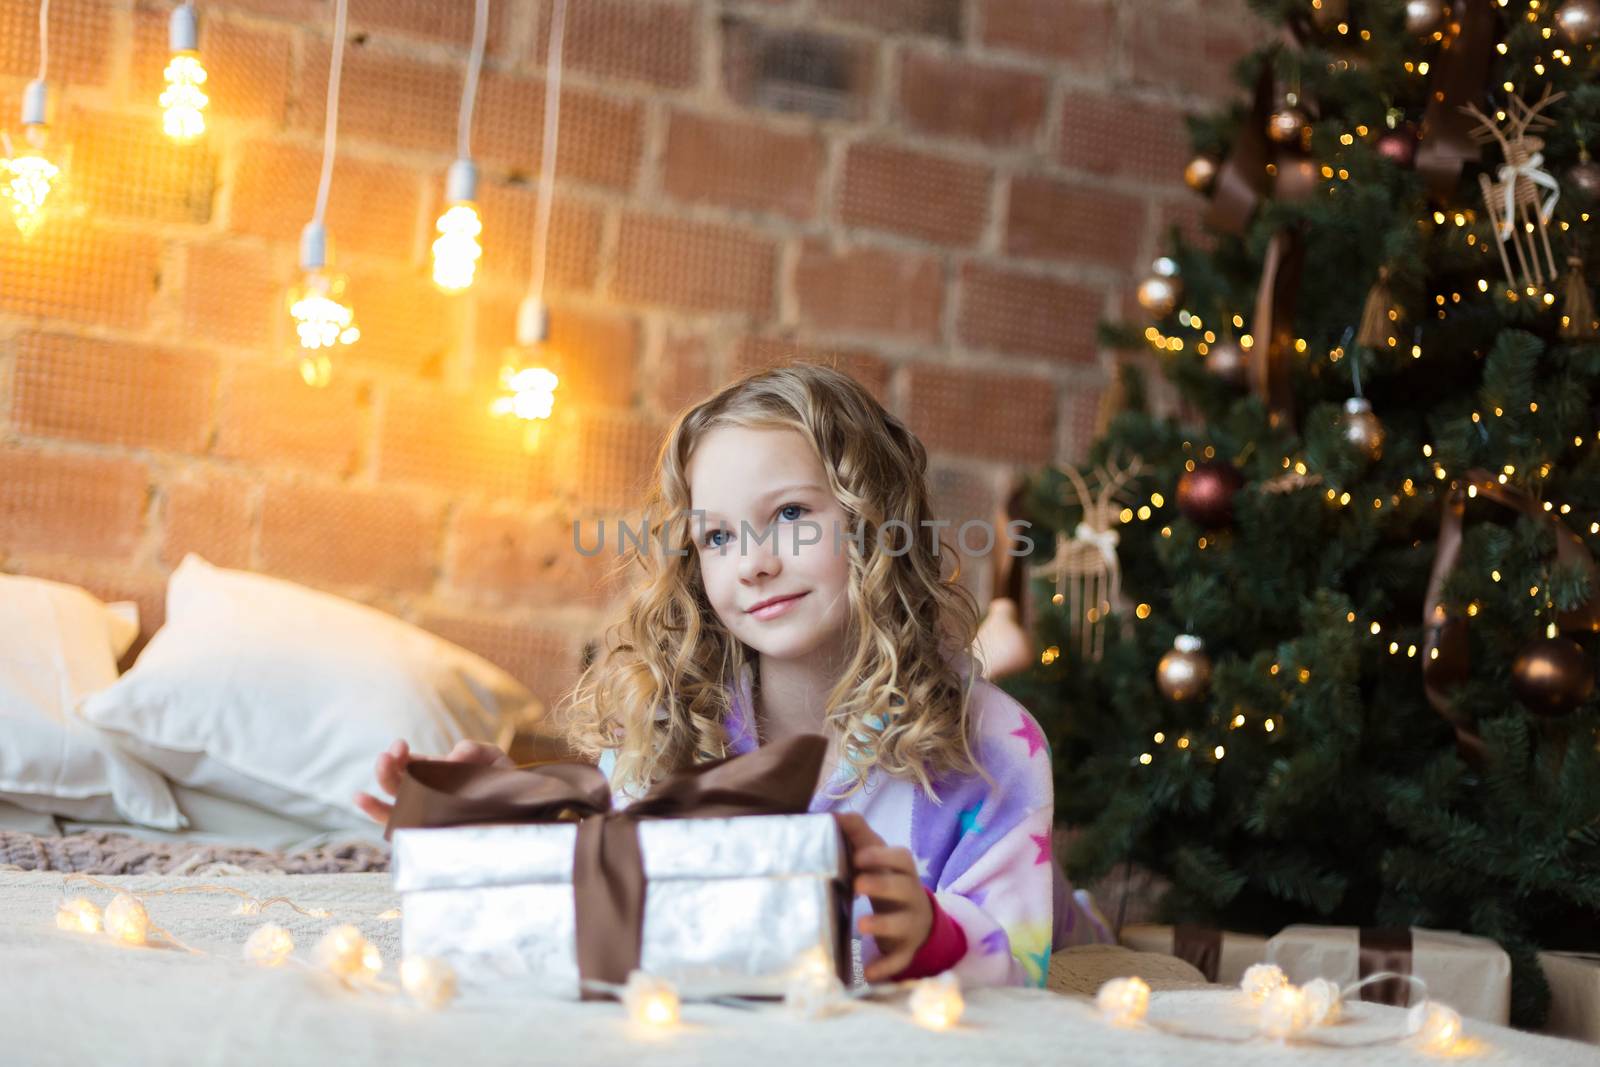 Cute Girl in pajamas lies on bed with a gift box and new year tree and lights behind